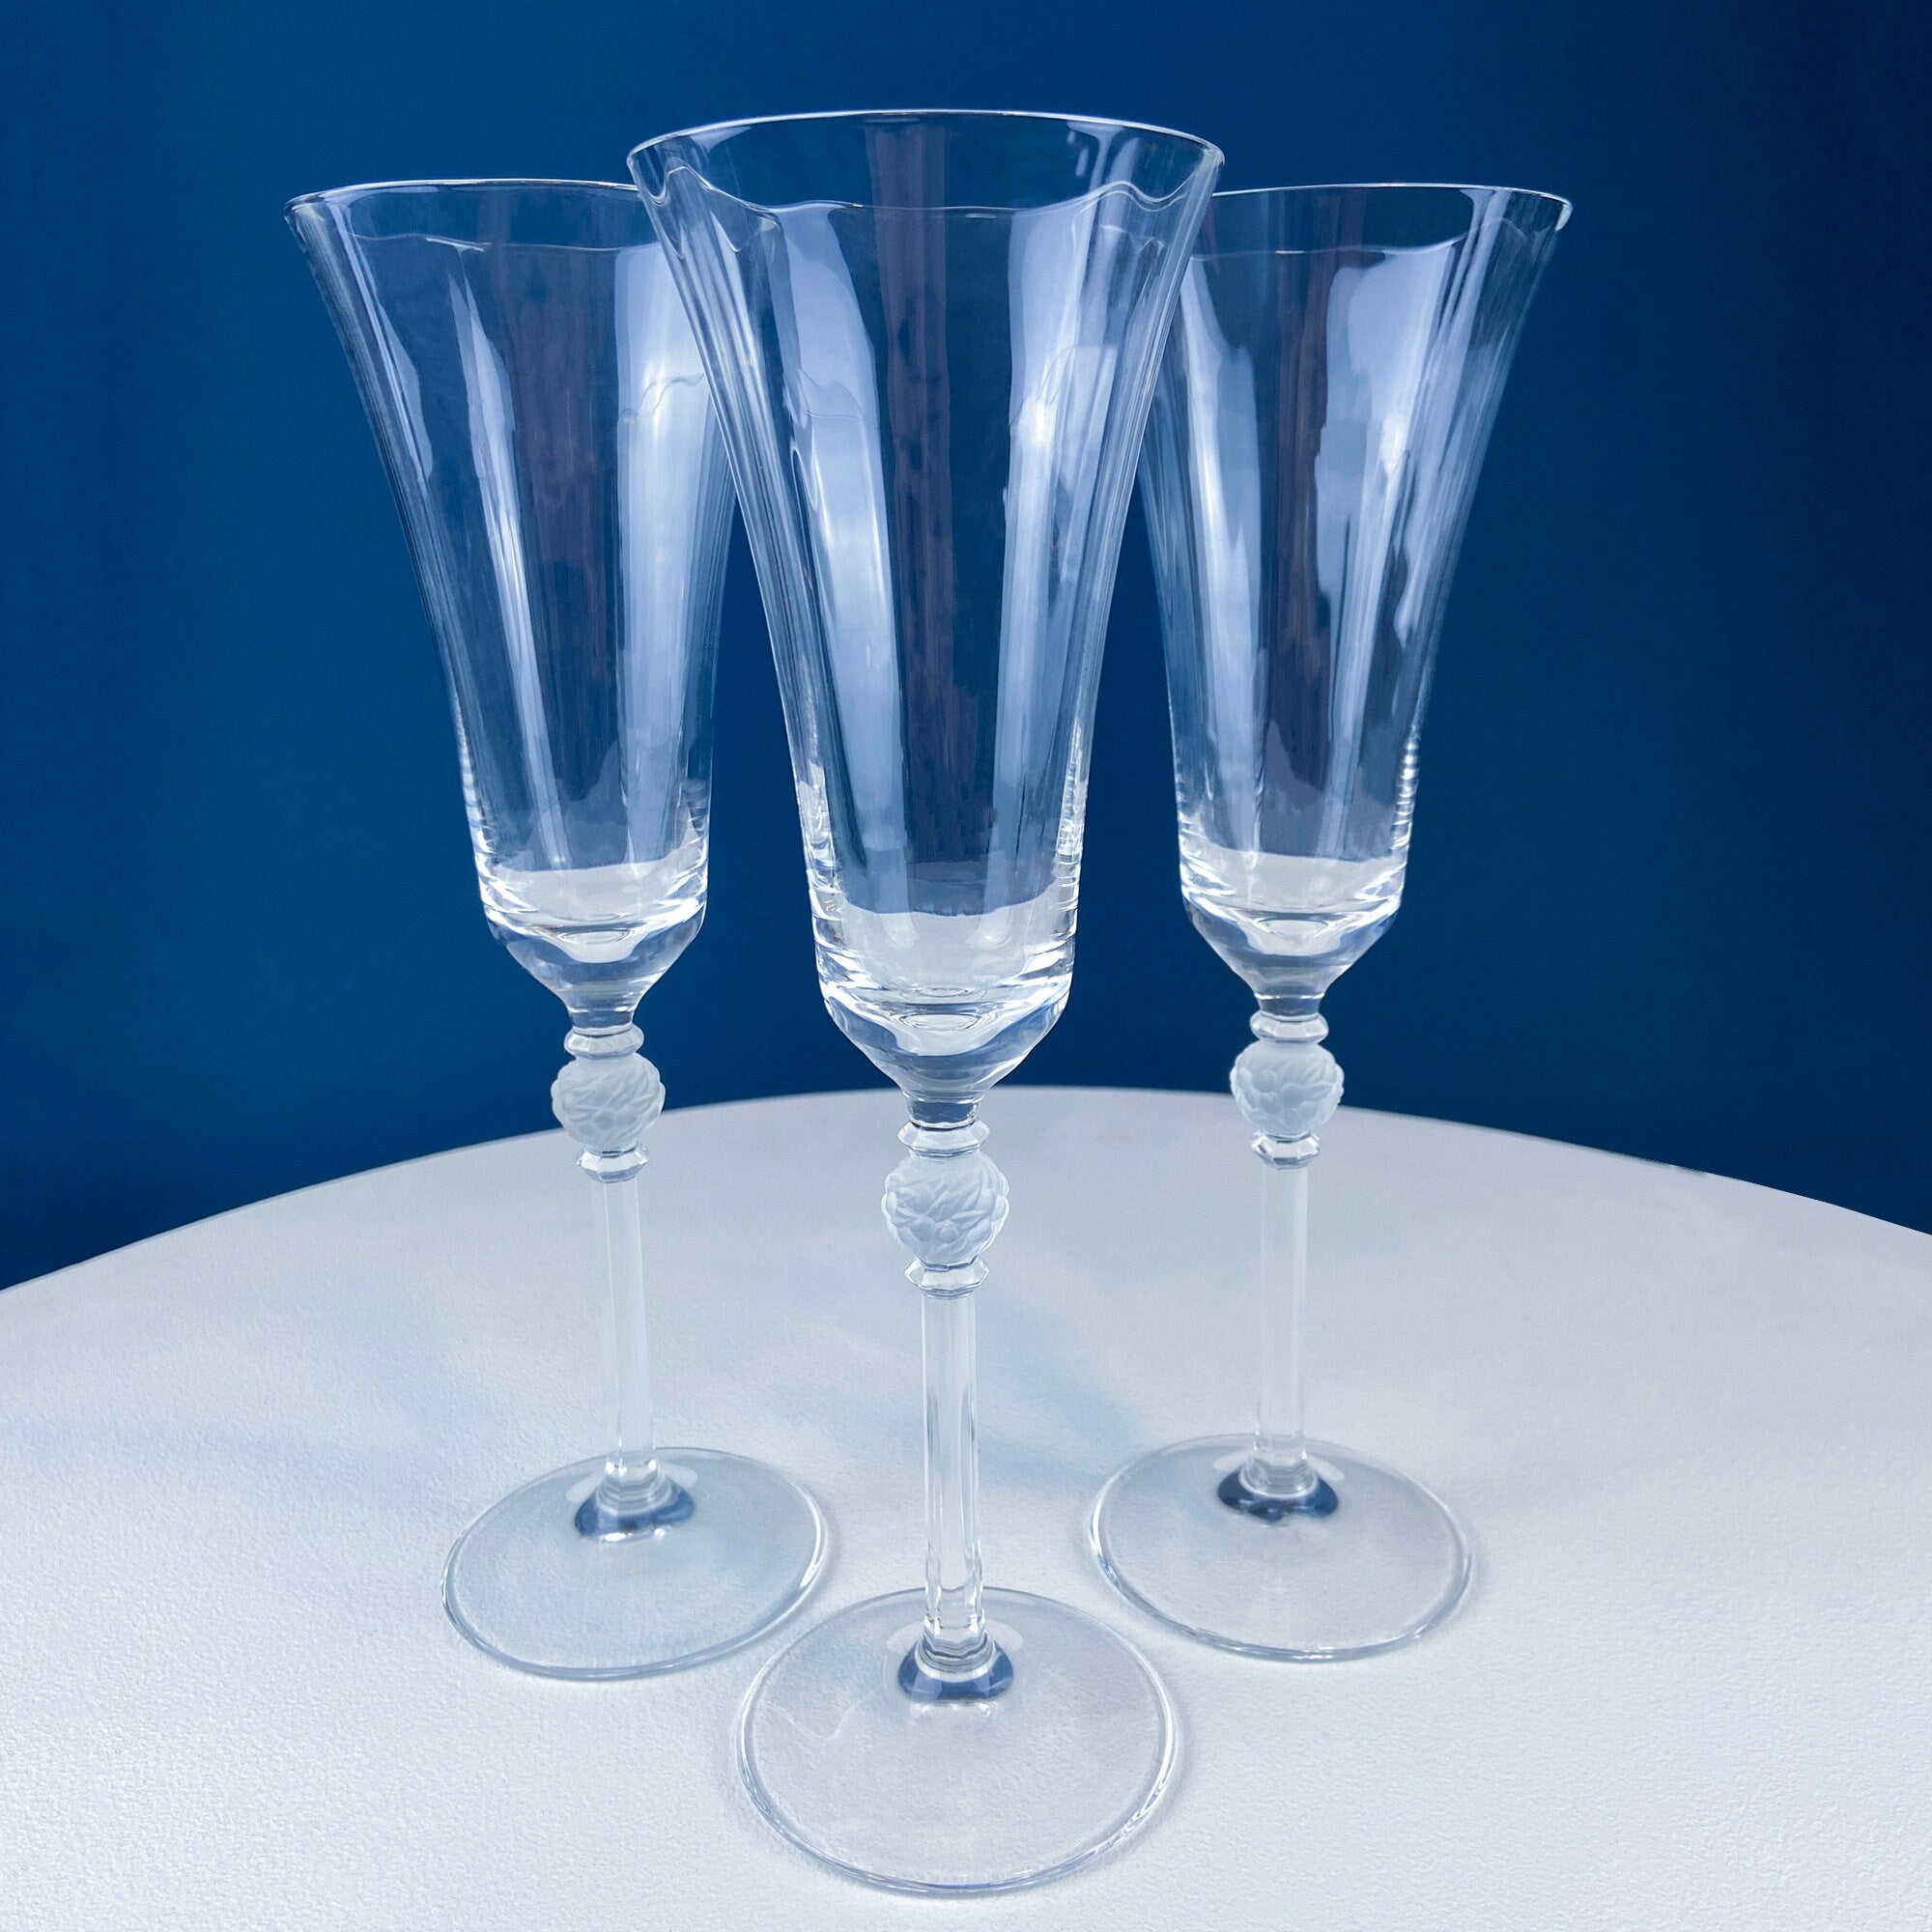 6 New Beautiful Lead Crystal Glasses by Mikasa